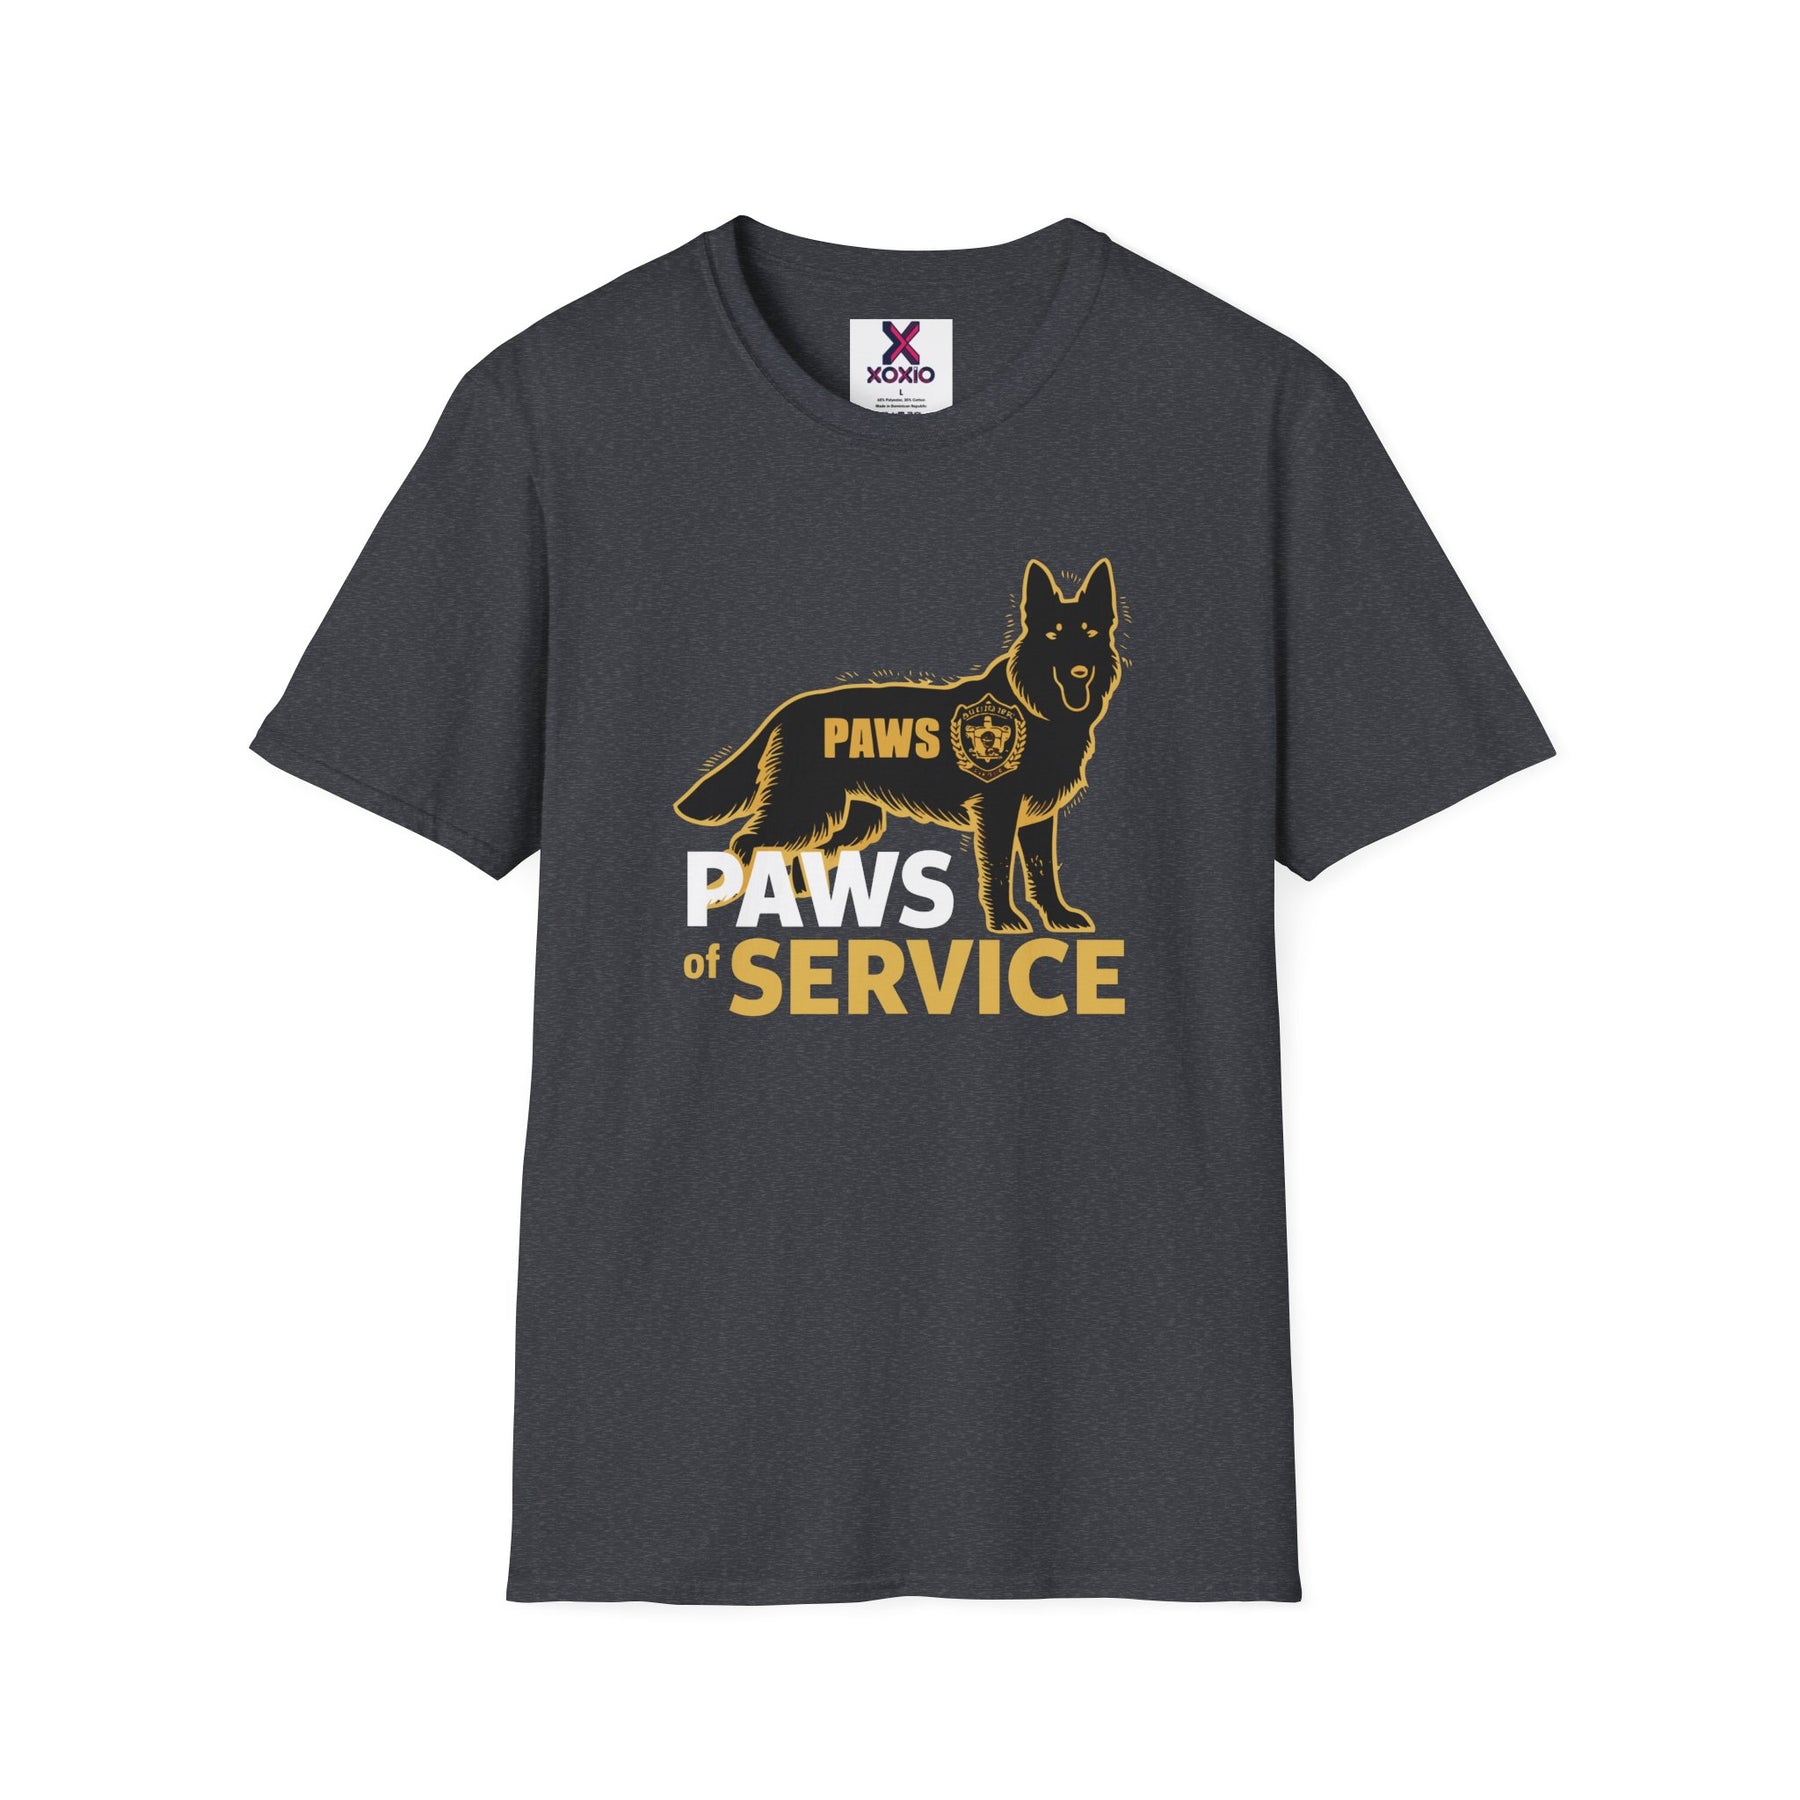 Paws Service Dogs German Shepherd Classic T-Shirt for All